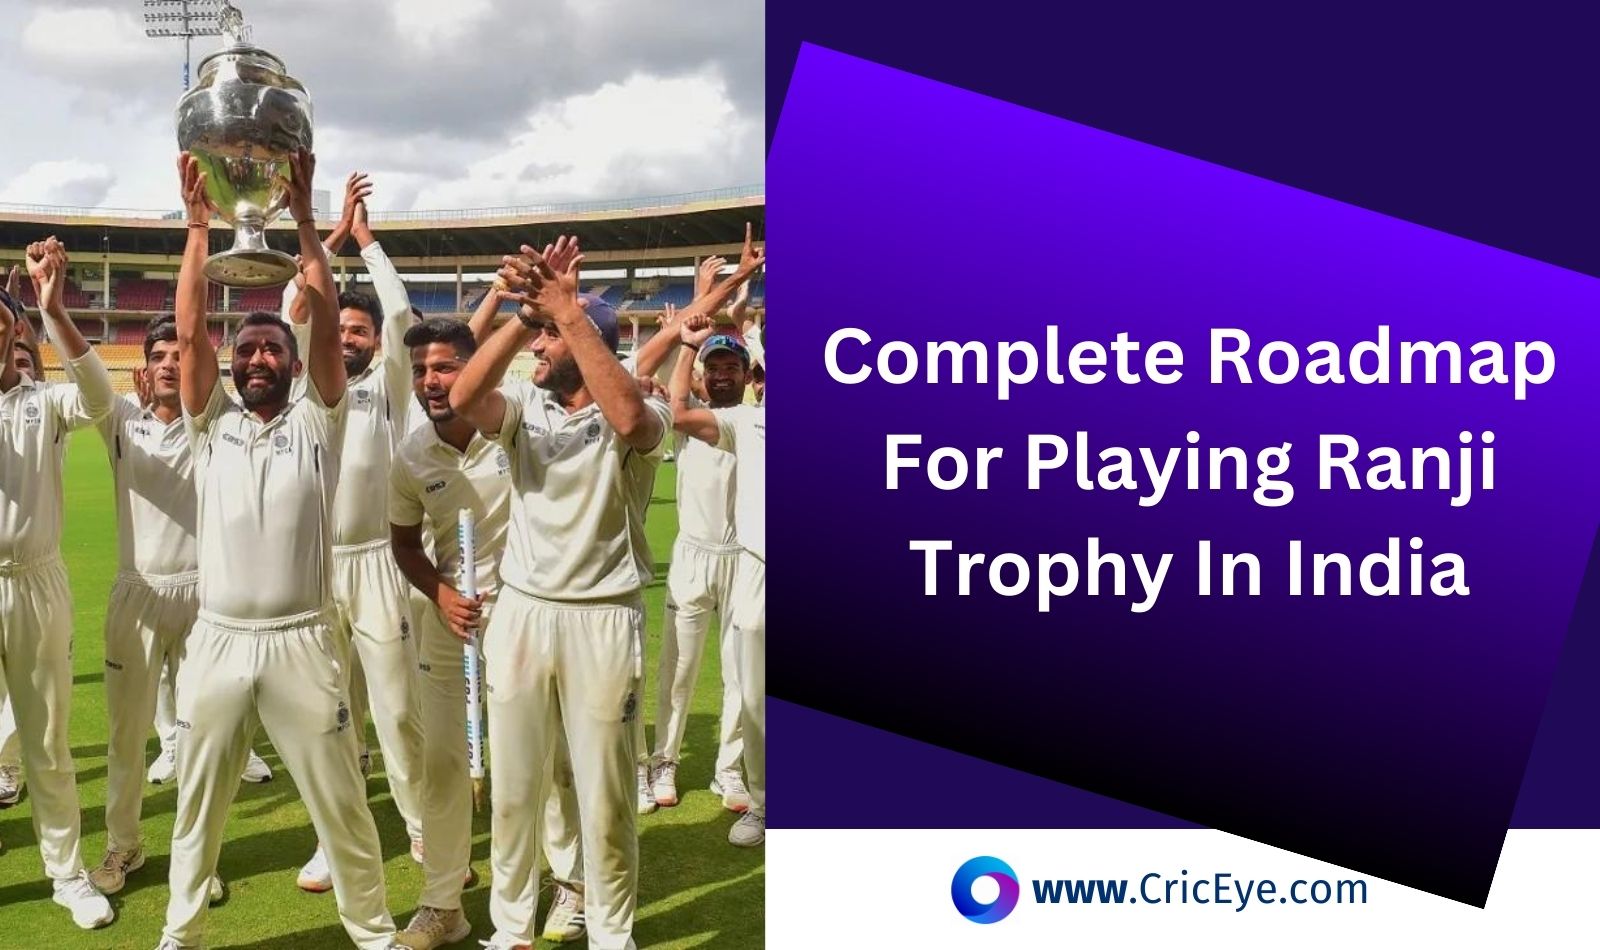 guide on how to play ranji trophy cricket in india